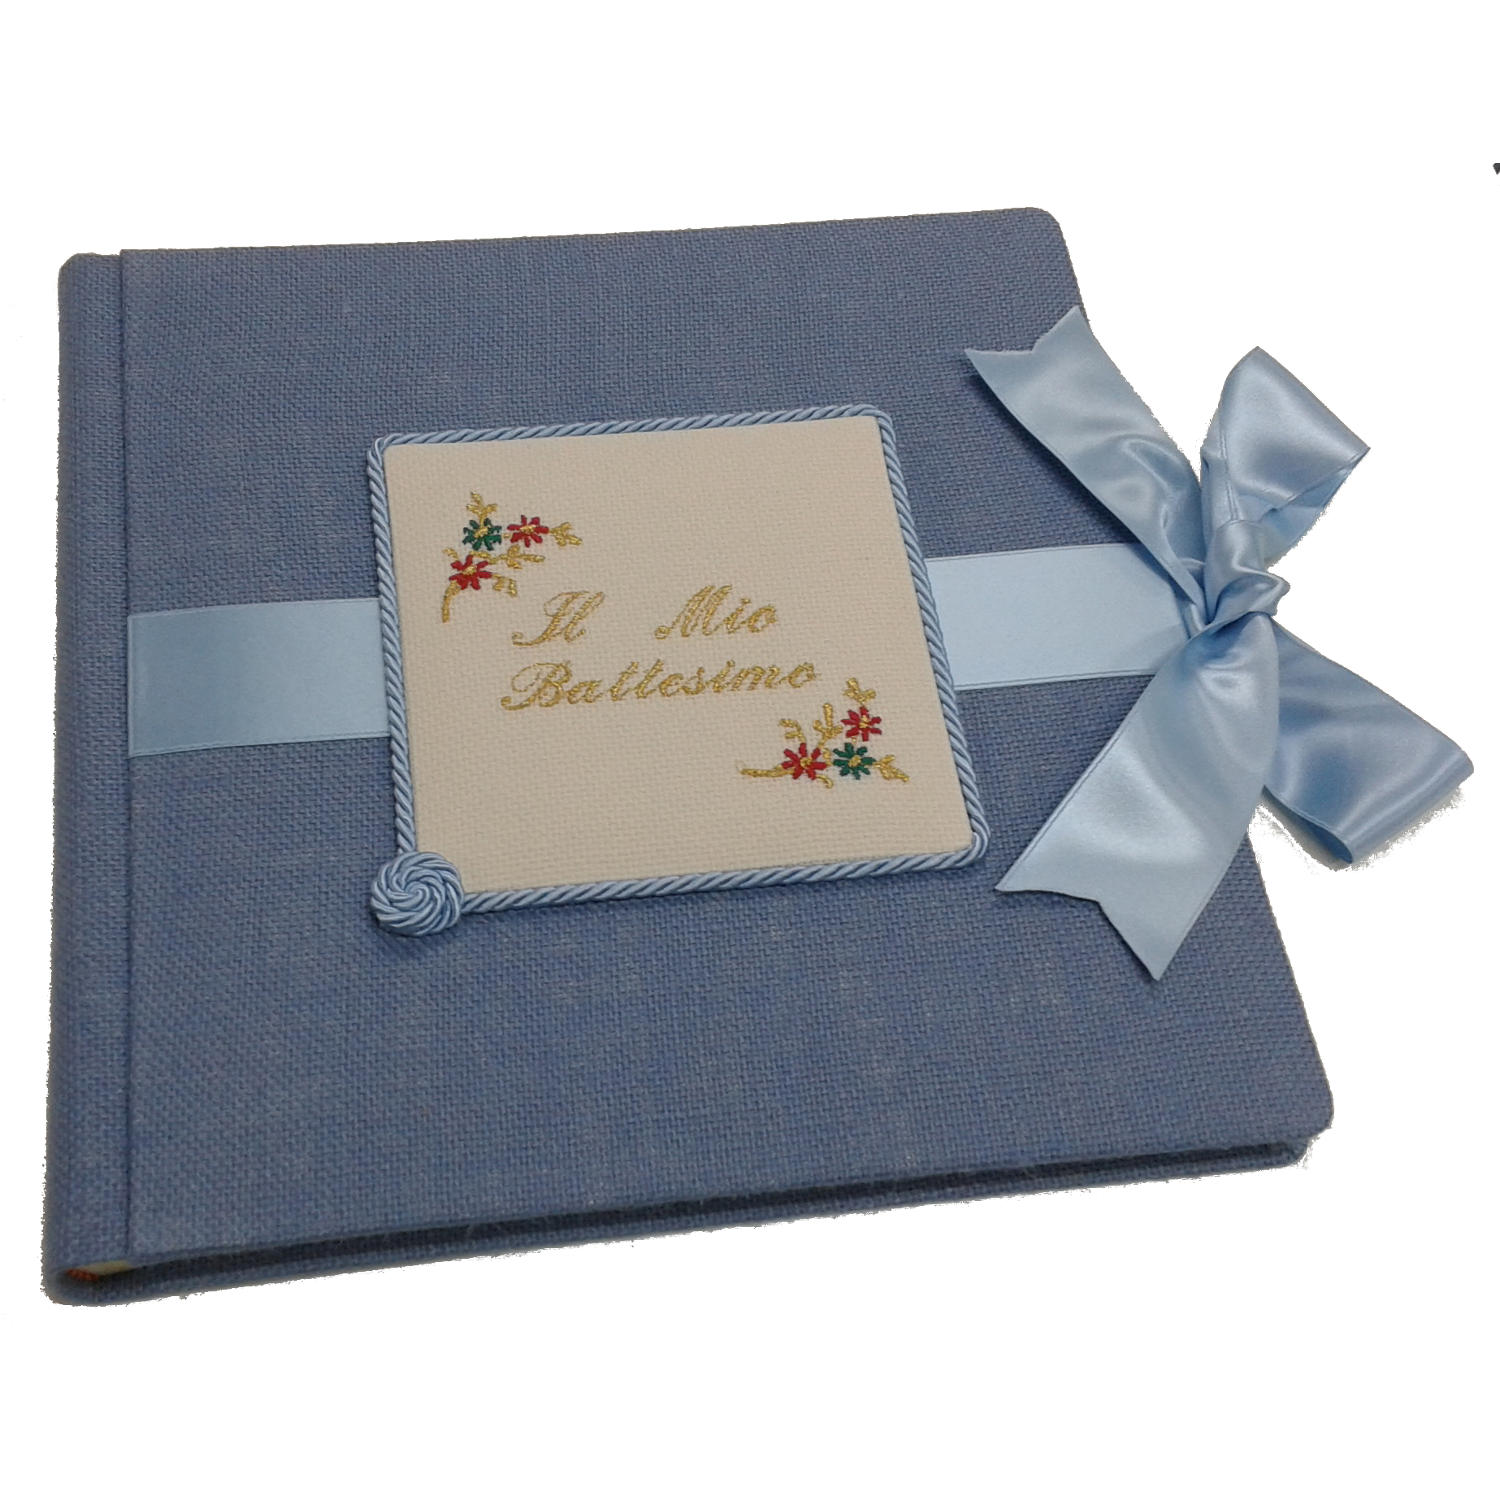 Italian Handcrafted Photo Albums - Baptism